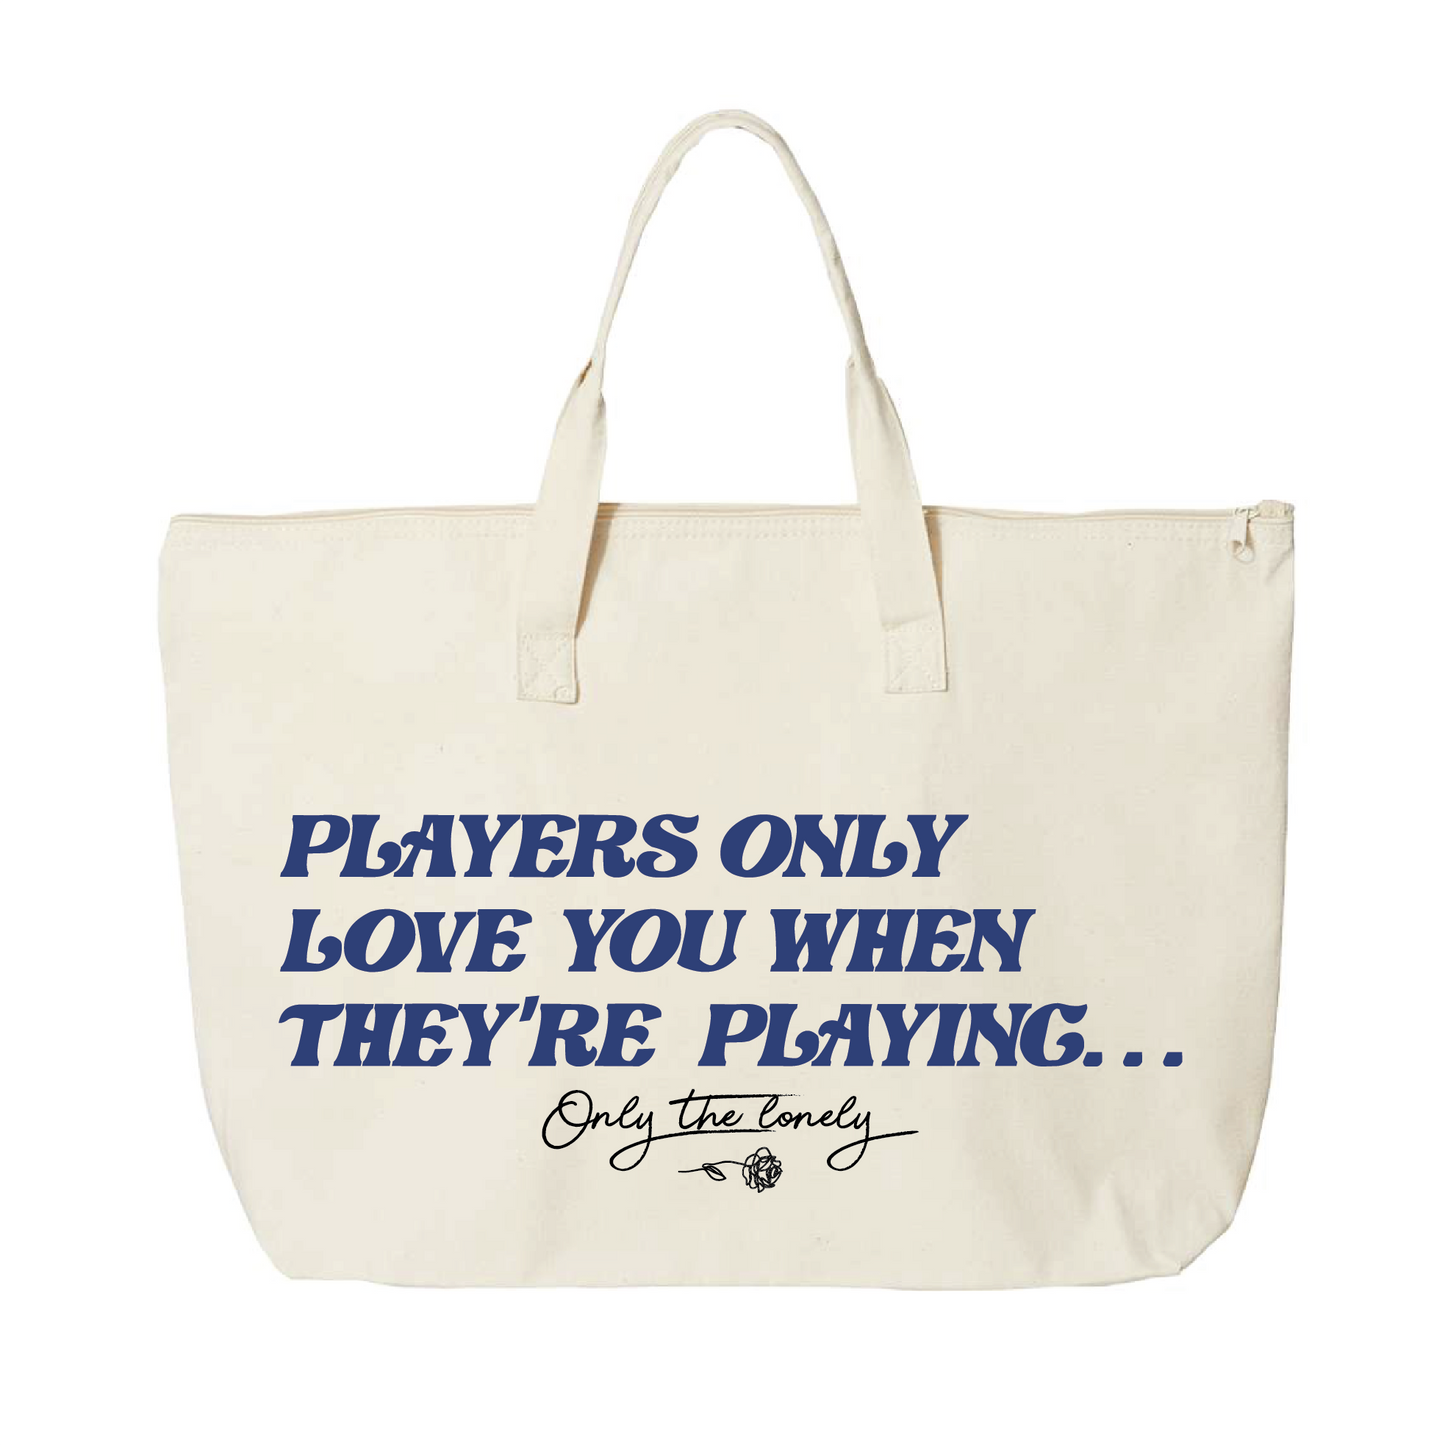 ONLY THE LONELY "PLAYERS ONLY LOVE YOU WHEN THEY'RE PLAYING" TOTE BAG